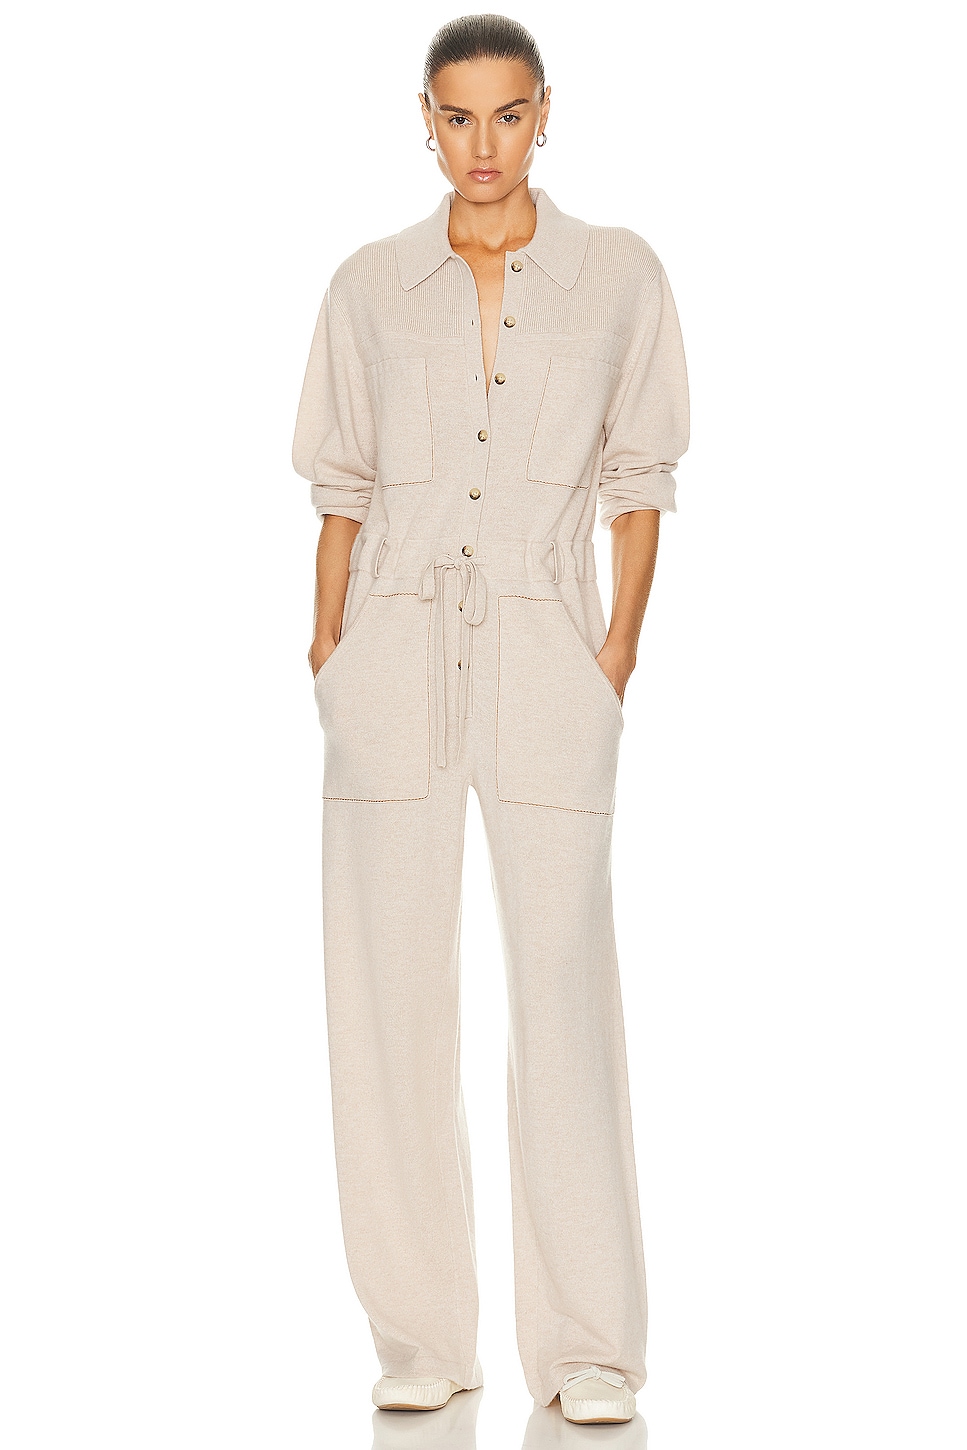 Image 1 of Guest In Residence Everywear Coverall 2.0 in Oatmeal